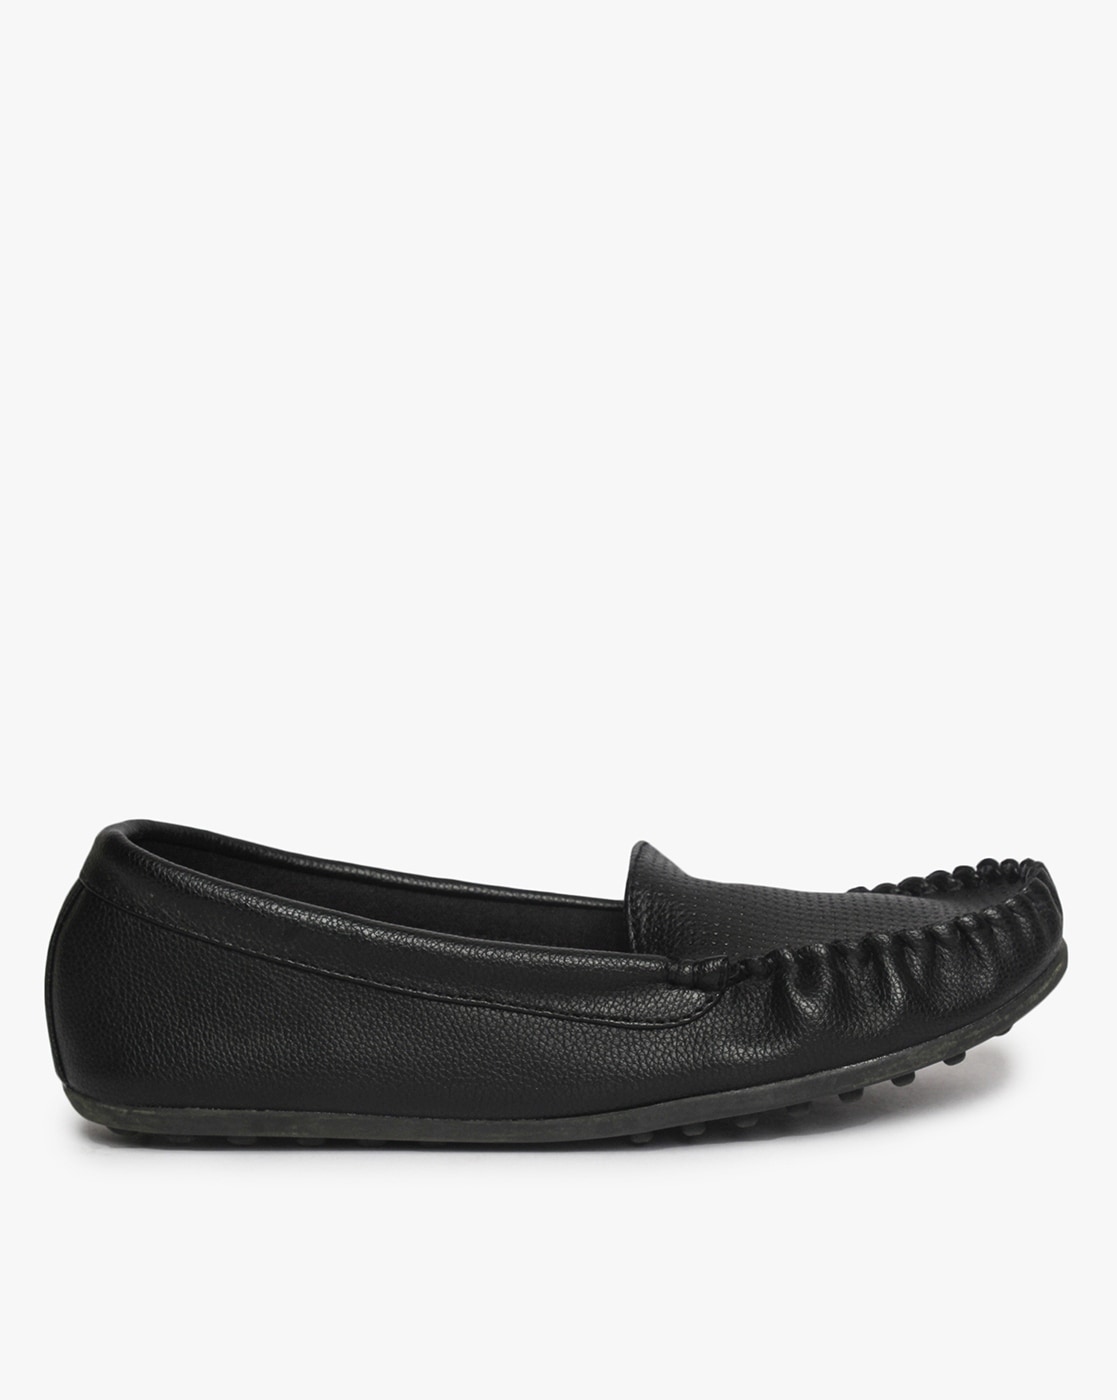 Aggregate 68+ payless leather shoes super hot